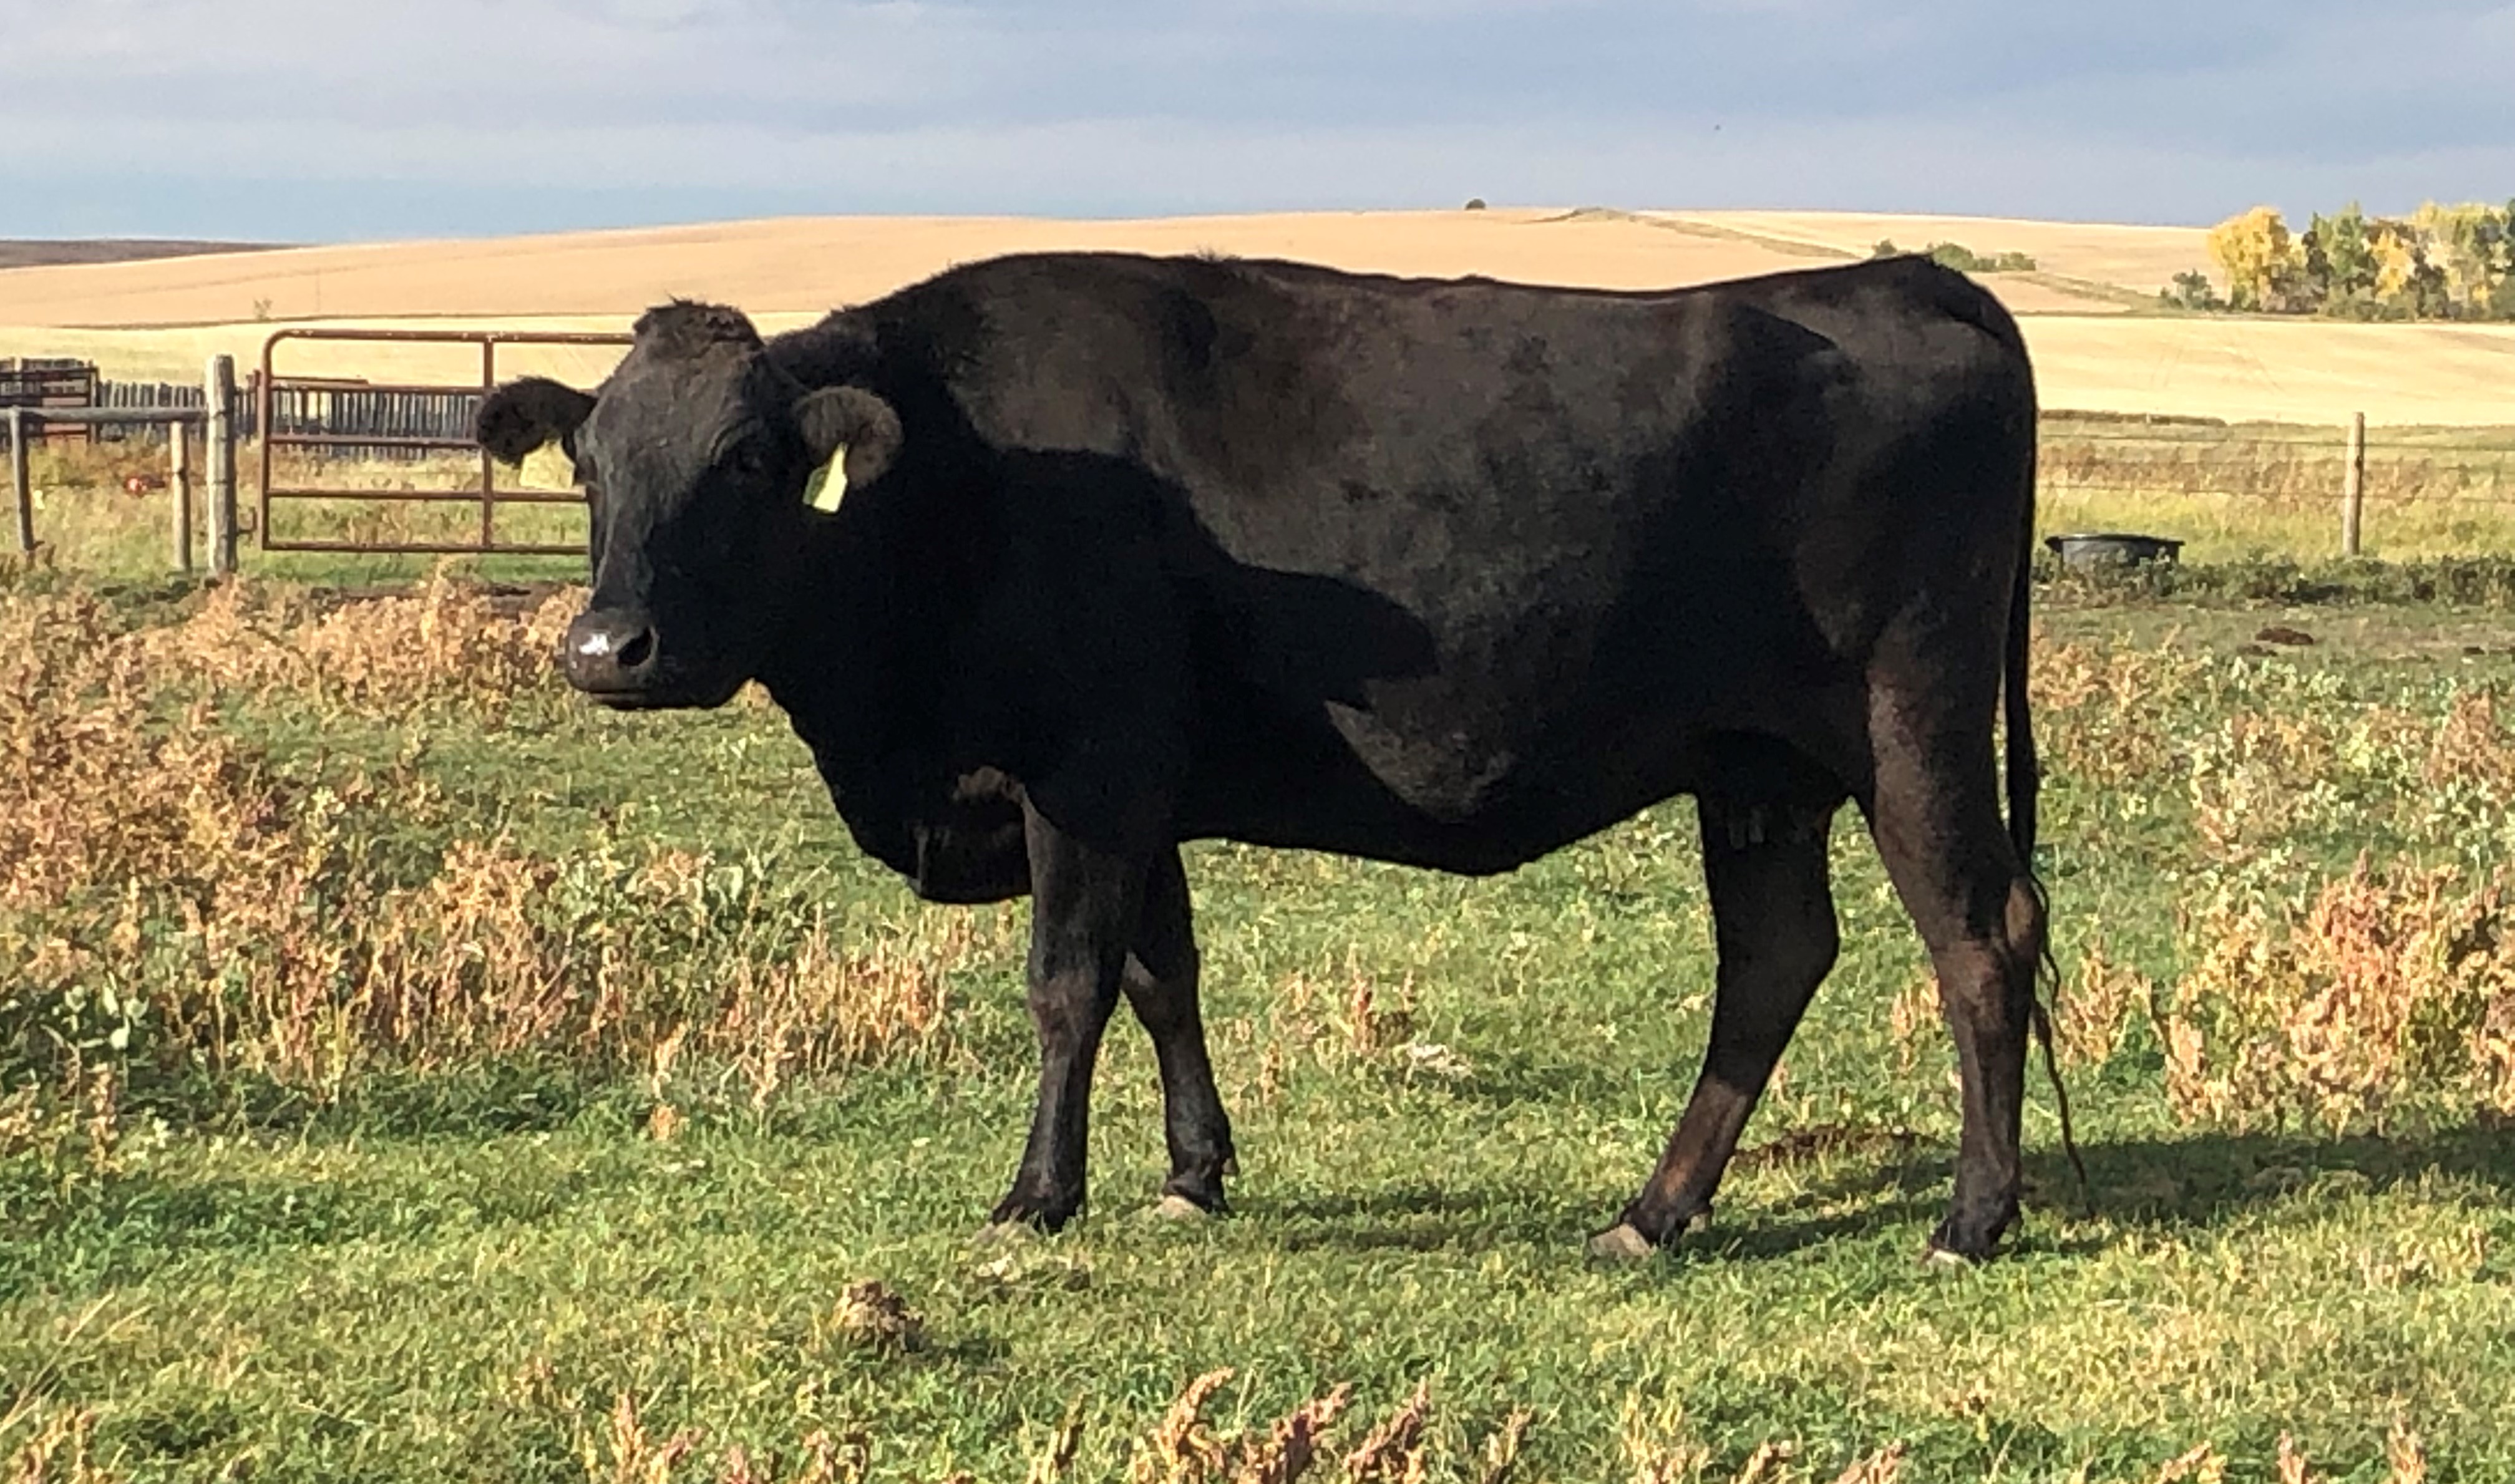 Wagyu cattle becoming popular in the U.S.